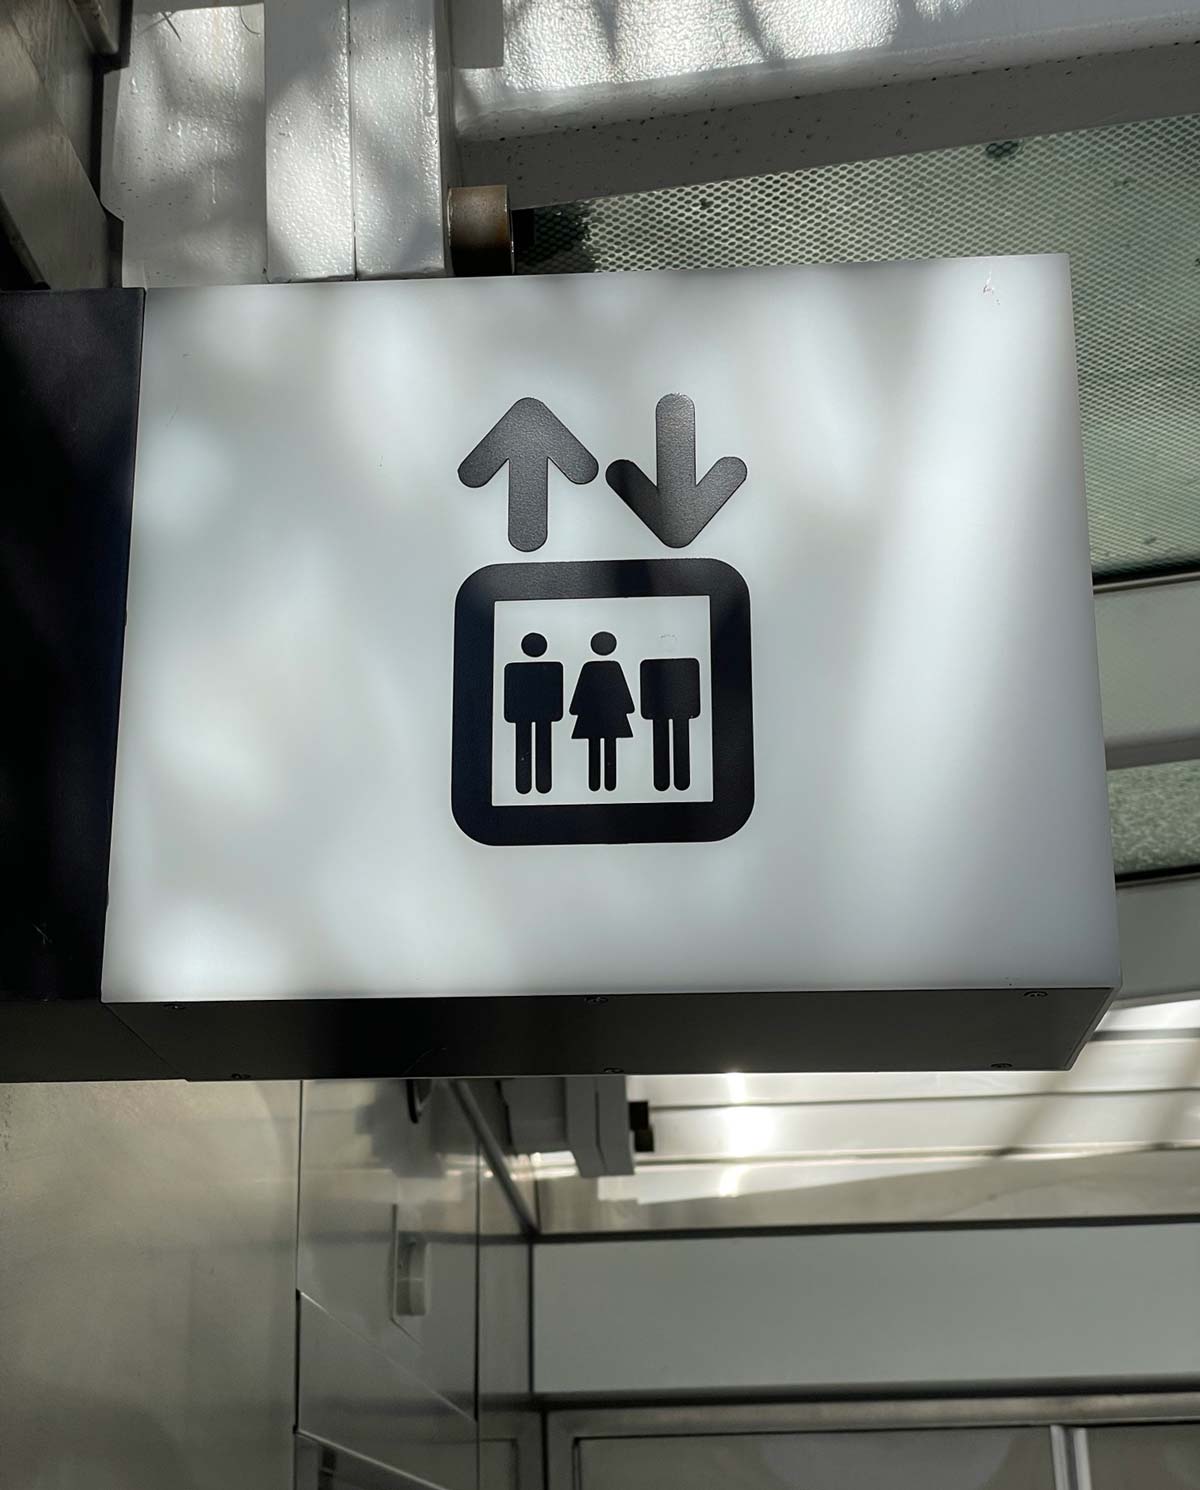 Elevator for men, women and the headless